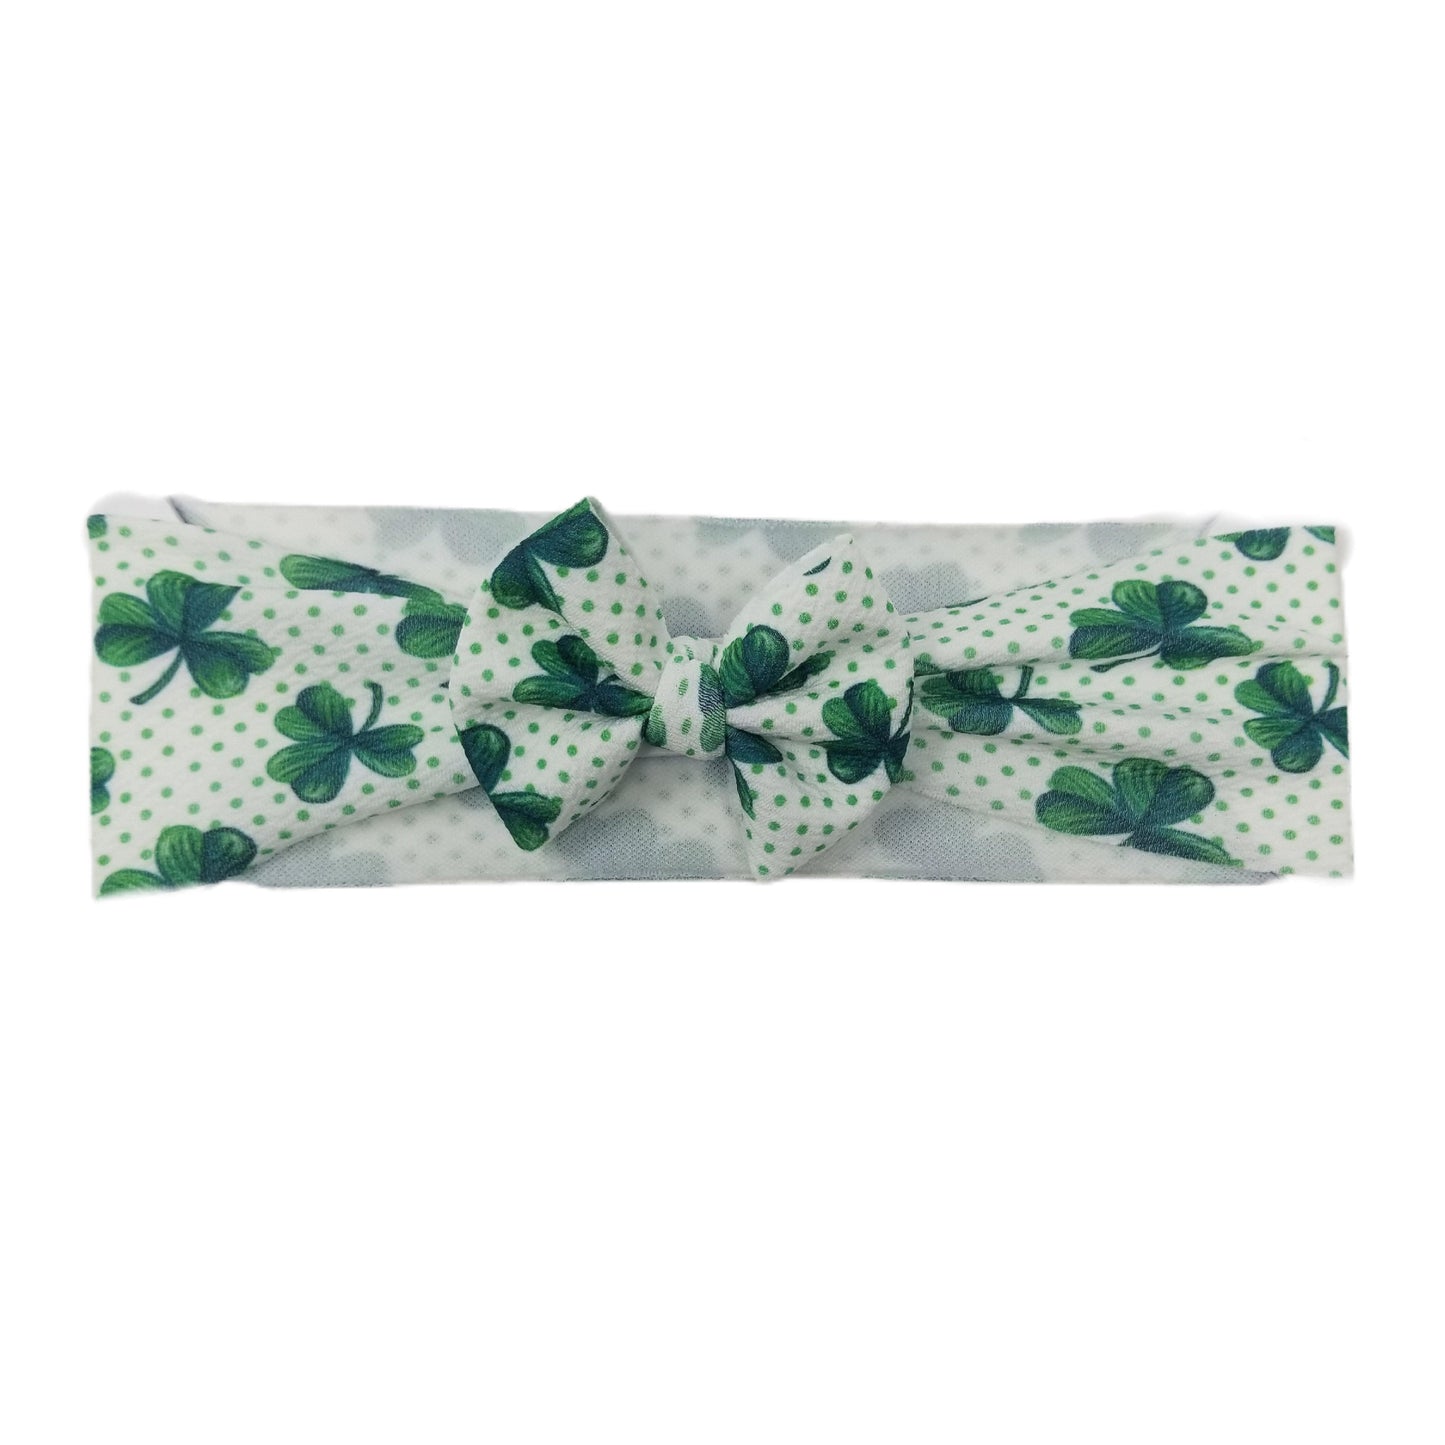 Green Clover Fabric Bow Headwrap - Waterfall Wishes